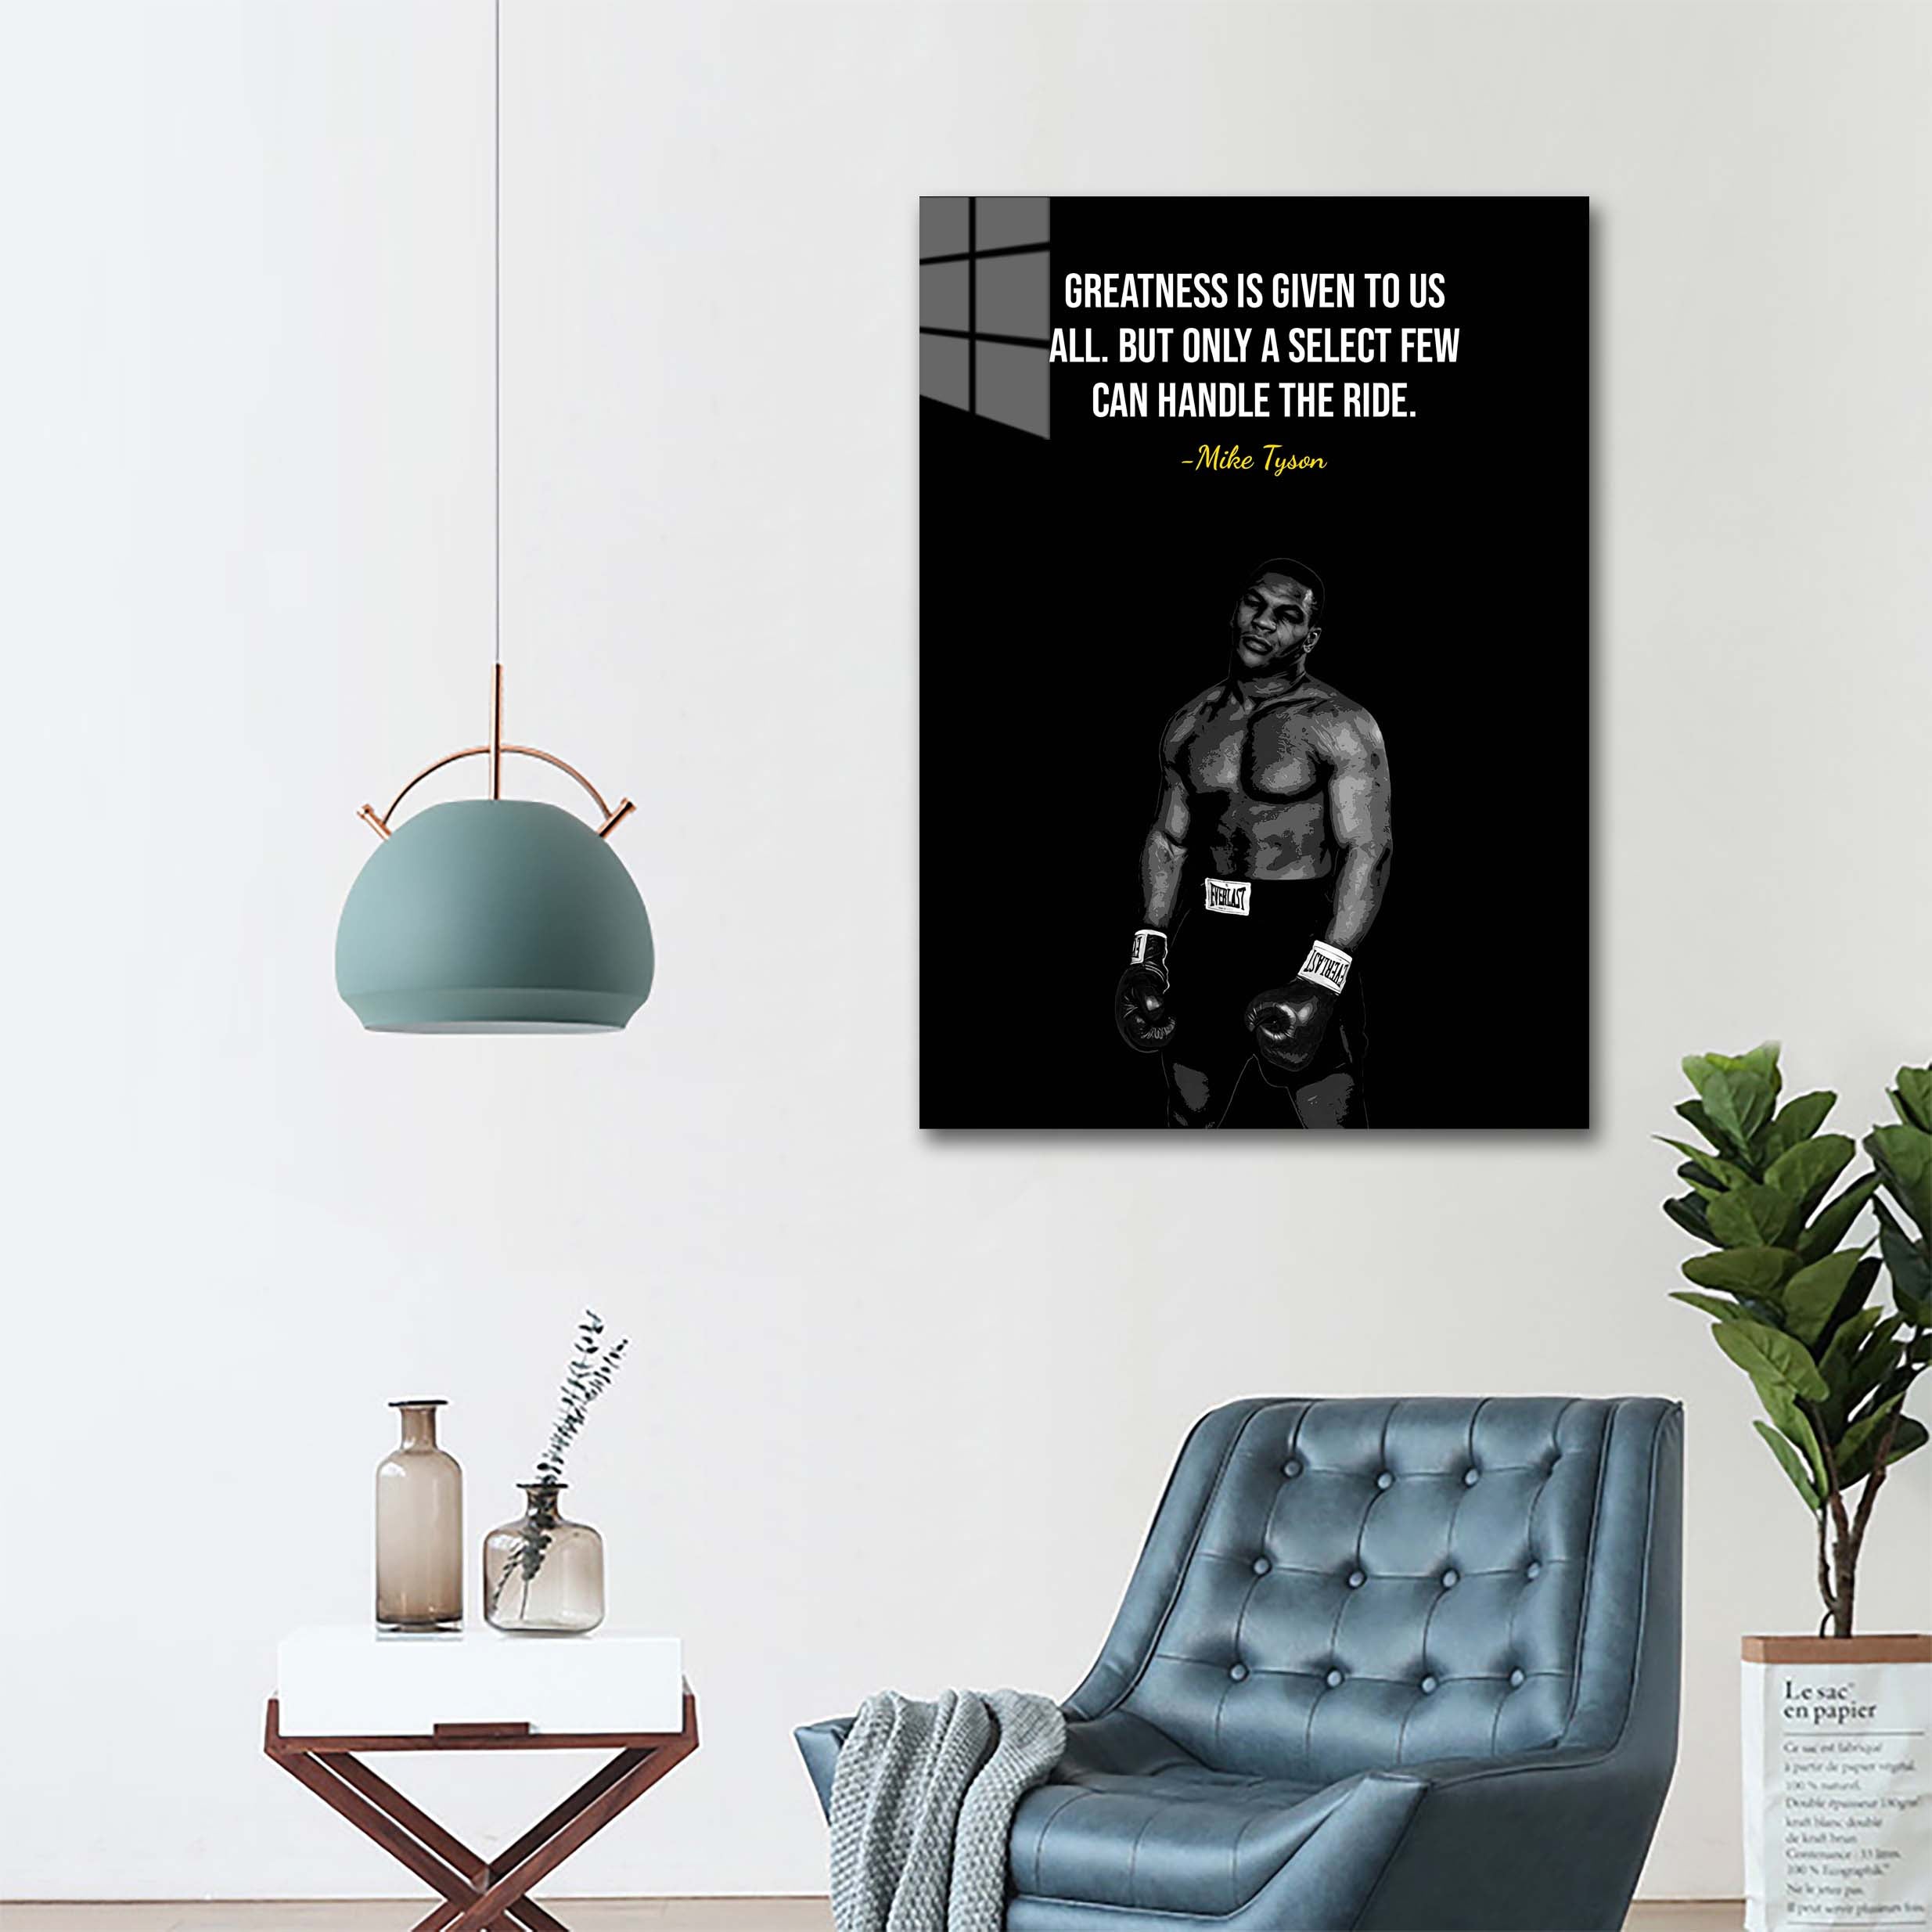 Mike Tyson Boxing quotes -designed by @Pus Meong art